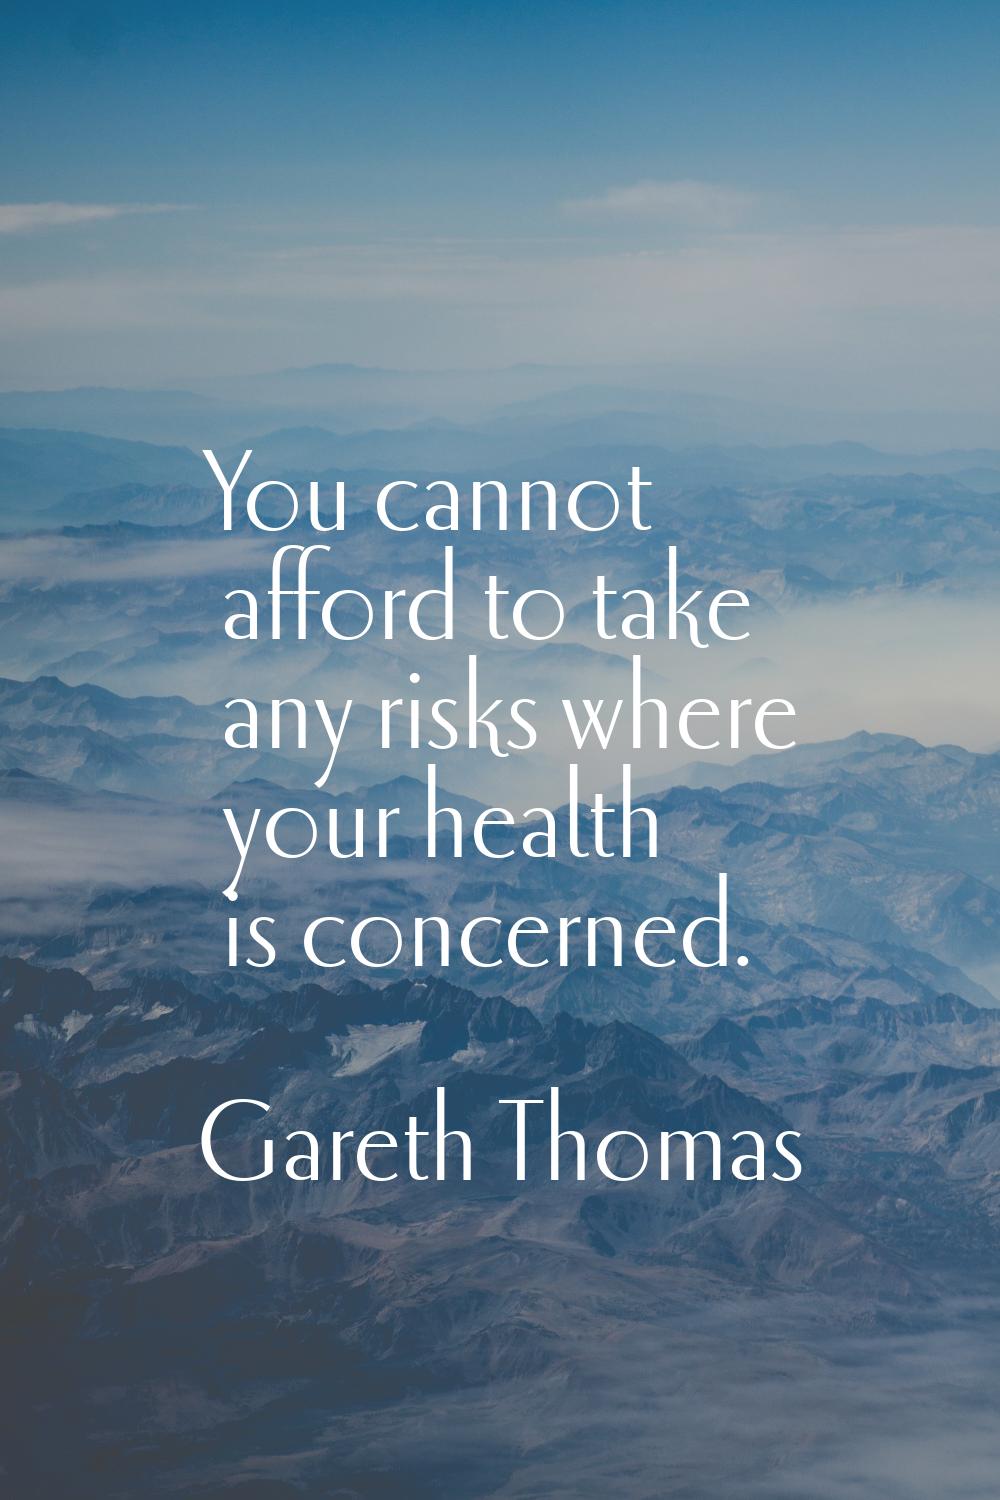 You cannot afford to take any risks where your health is concerned.